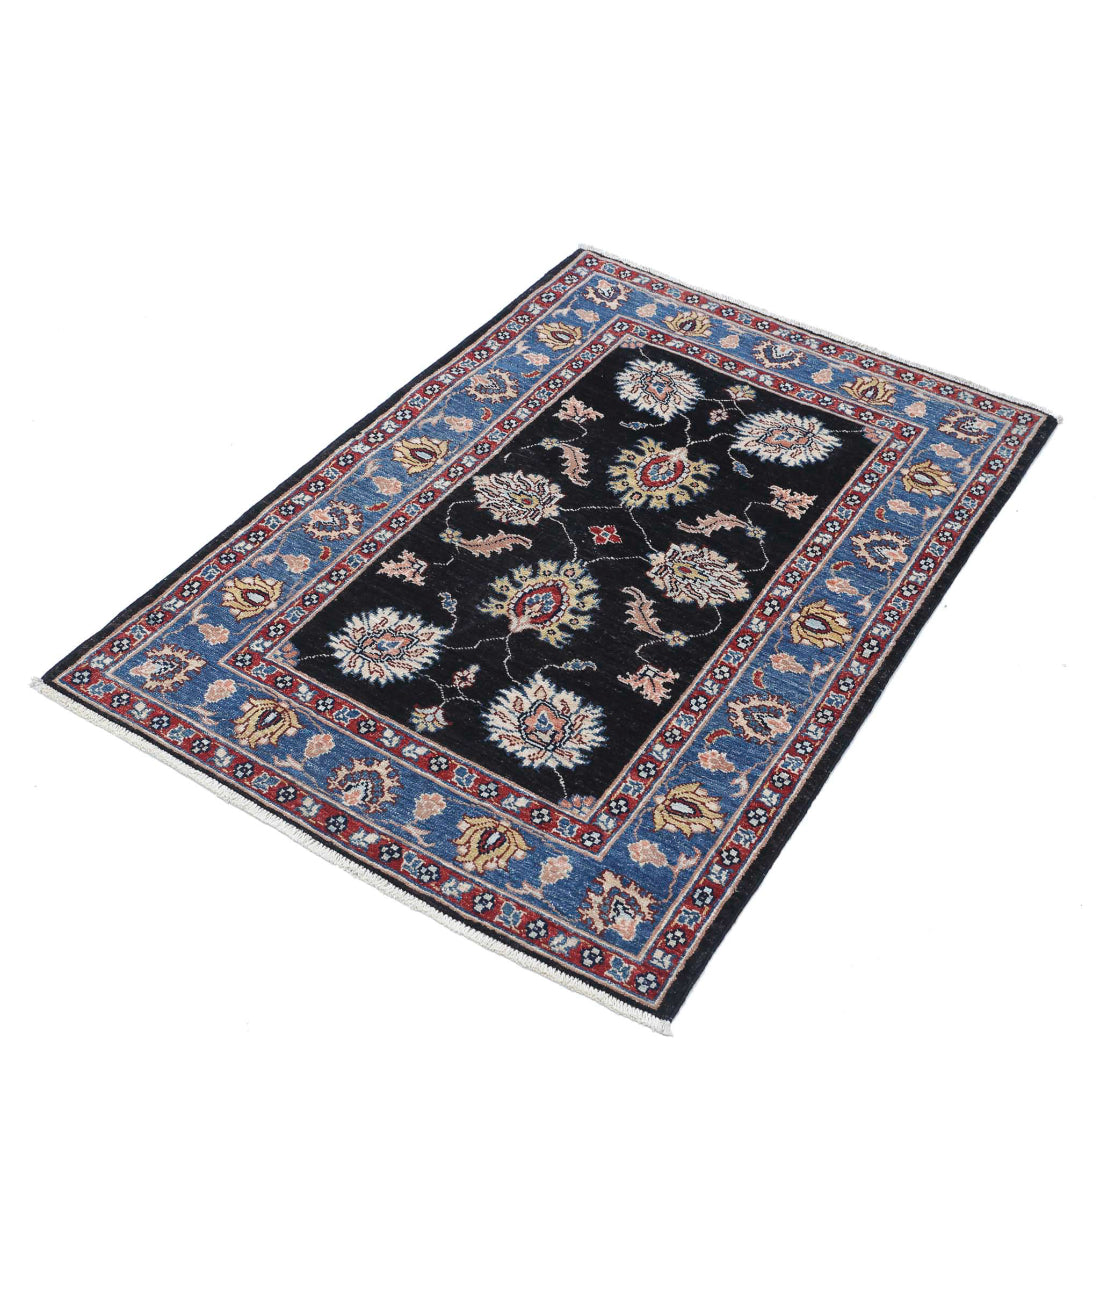 Ziegler 2'9'' X 4'1'' Hand-Knotted Wool Rug 2'9'' x 4'1'' (83 X 123) / Black / Red